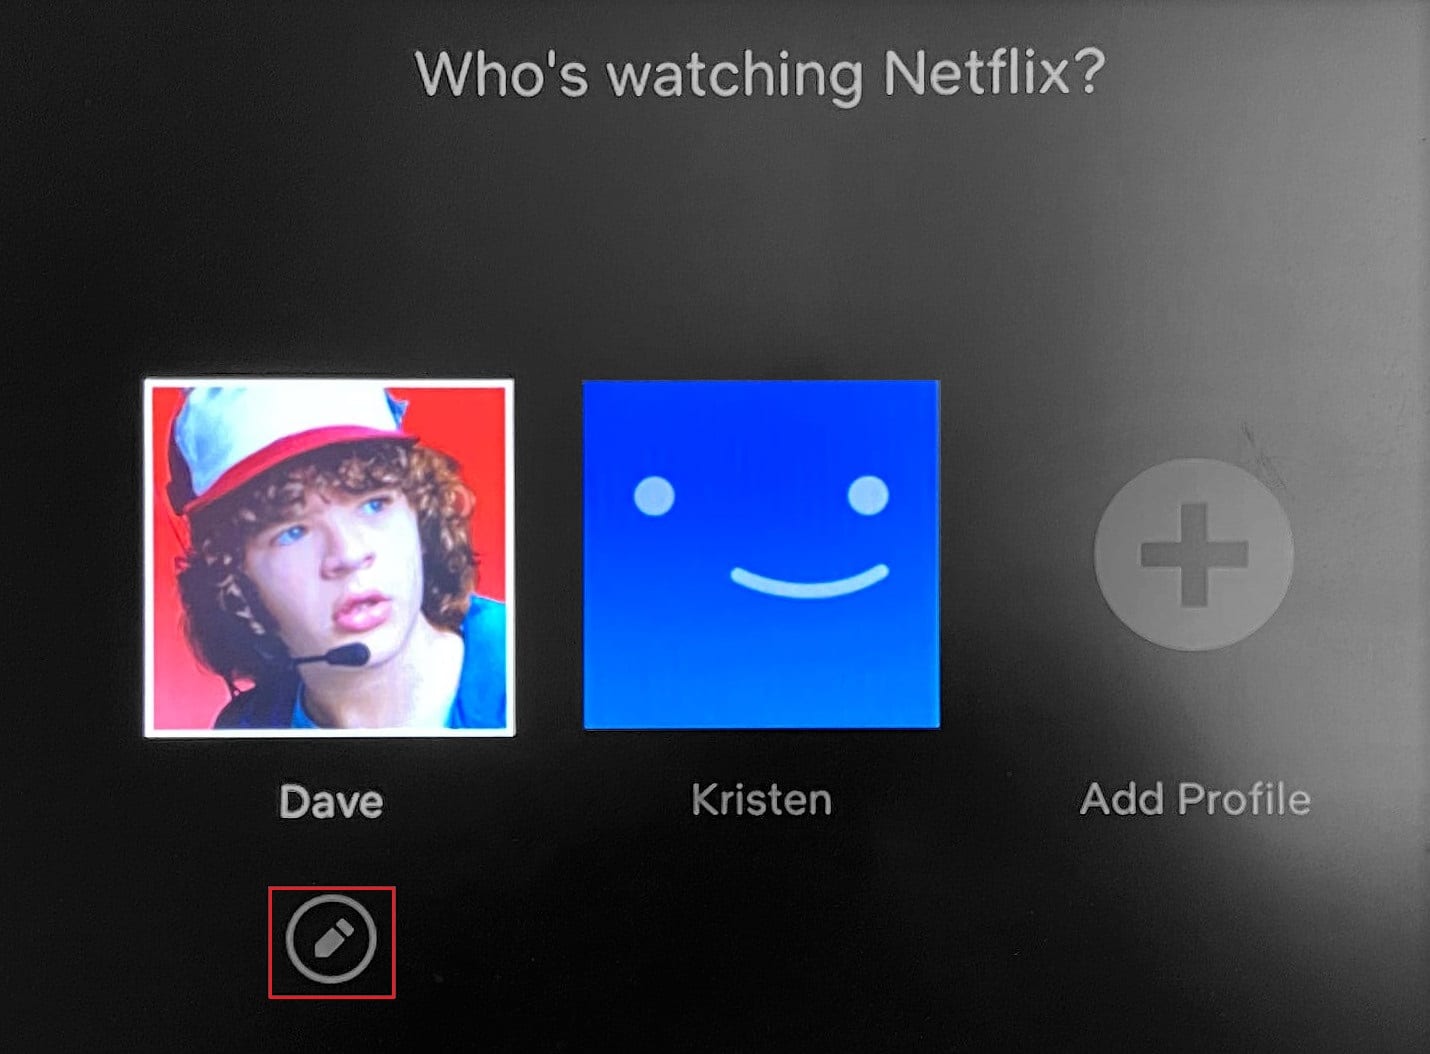 select the pencil icon for a particular netflix profile in TV